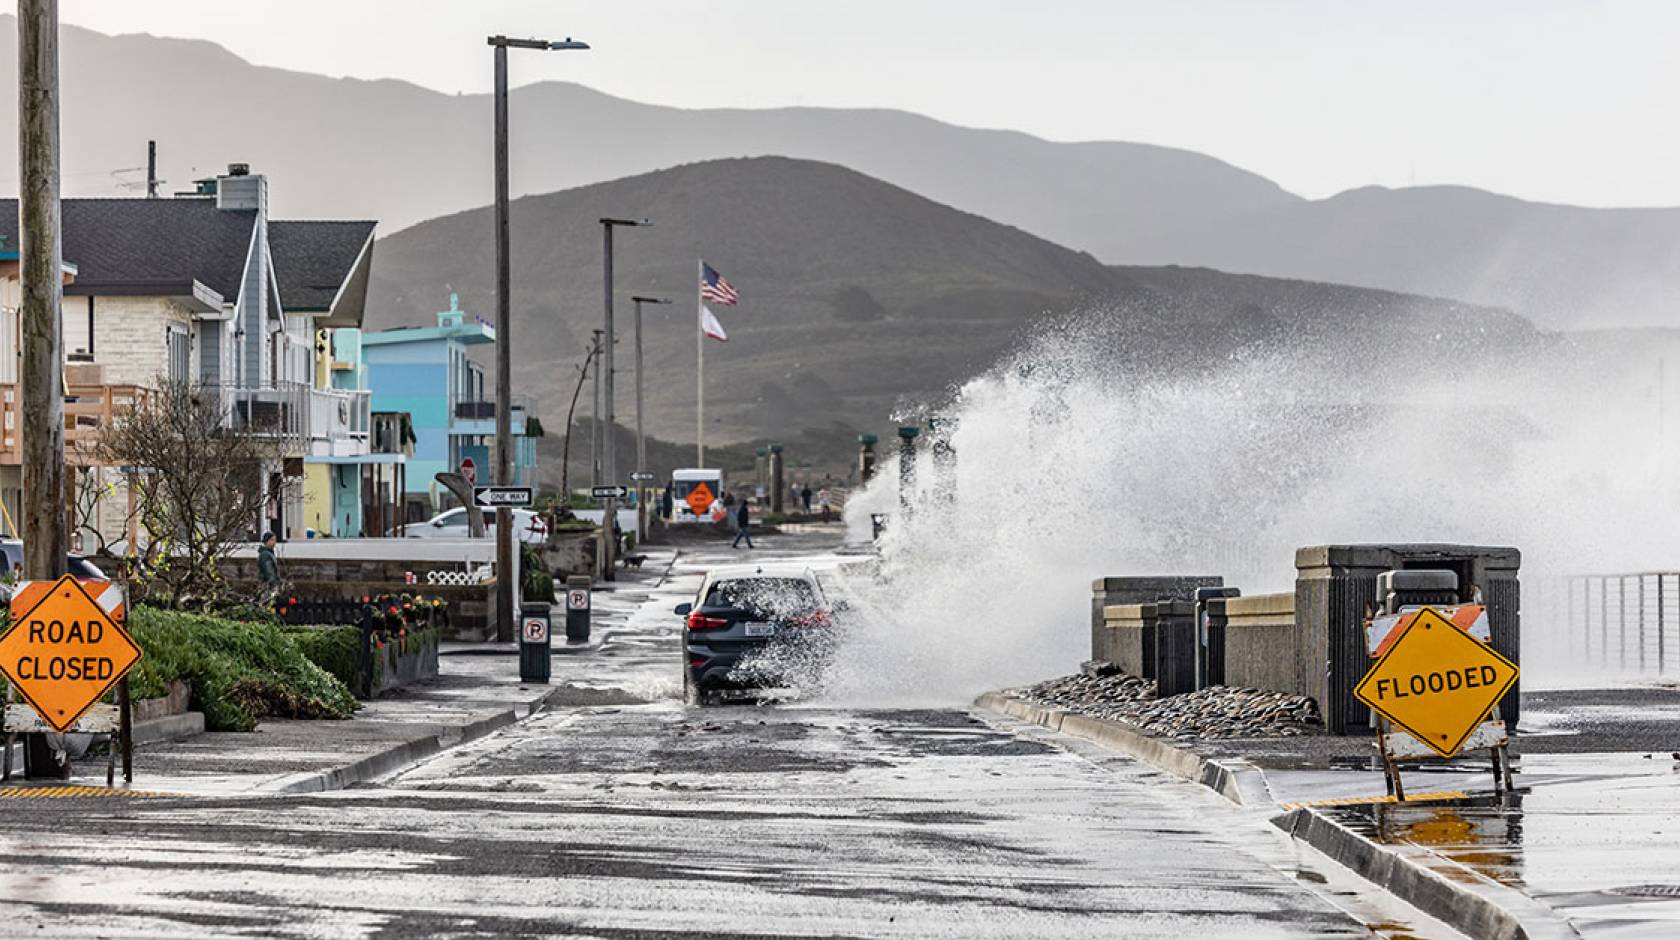 A wave crashes into a town street a blue car is driving on in Pacifica